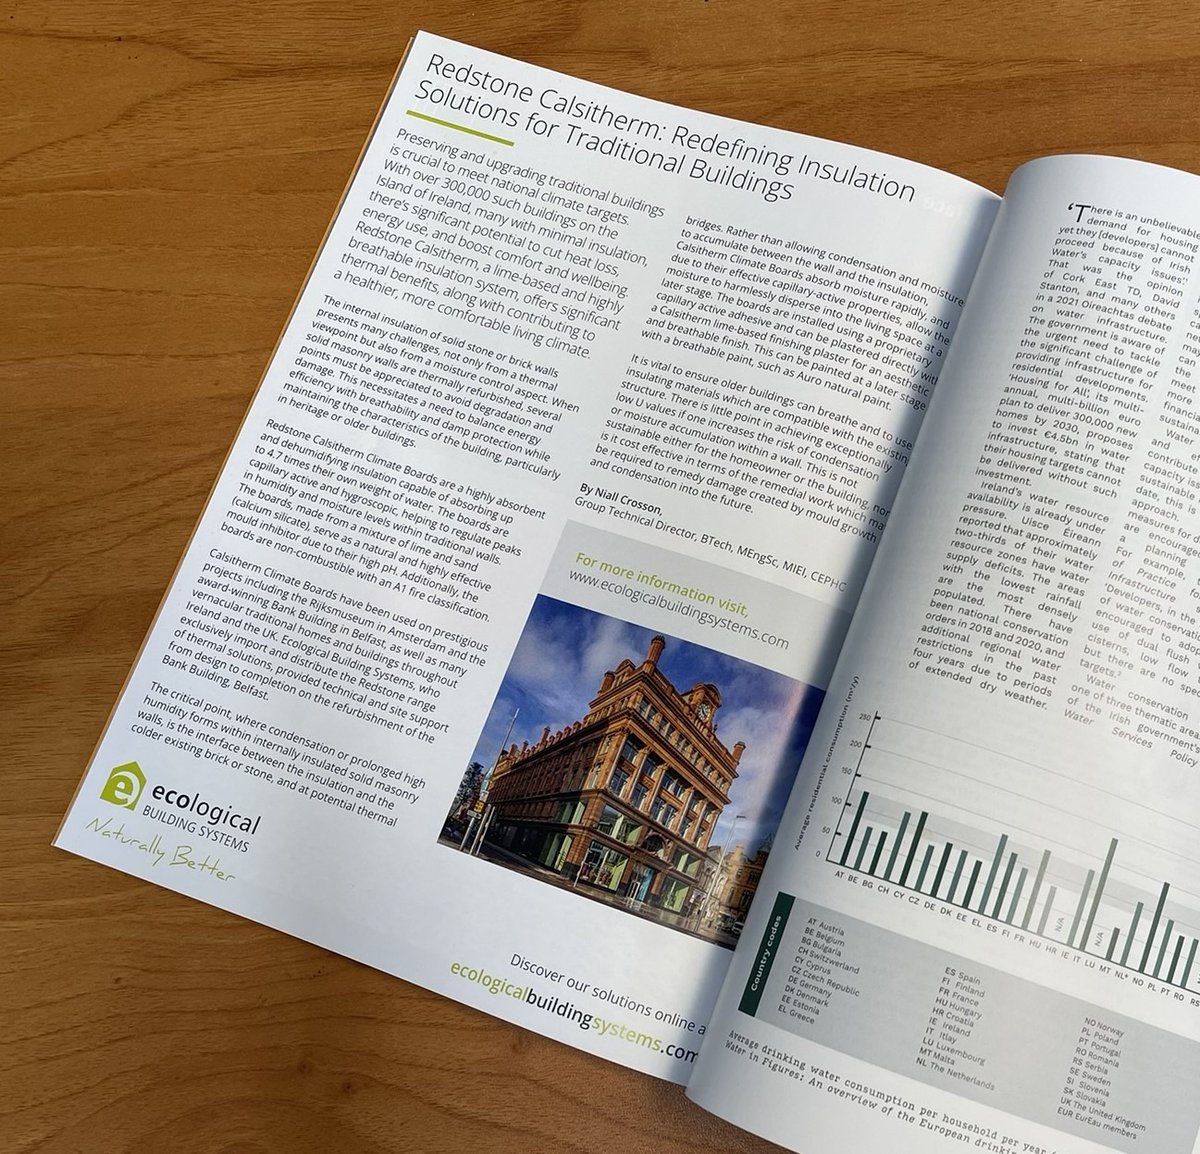 Our latest editorial in @archireland features Redstone Calsitherm, a highly breathable insulation system that helps cut heat loss, reduce energy use, and boost comfort & wellbeing. Calsitherm climate boards can absorb 4.7x their weight in water, prevent mould & are fire class A1.